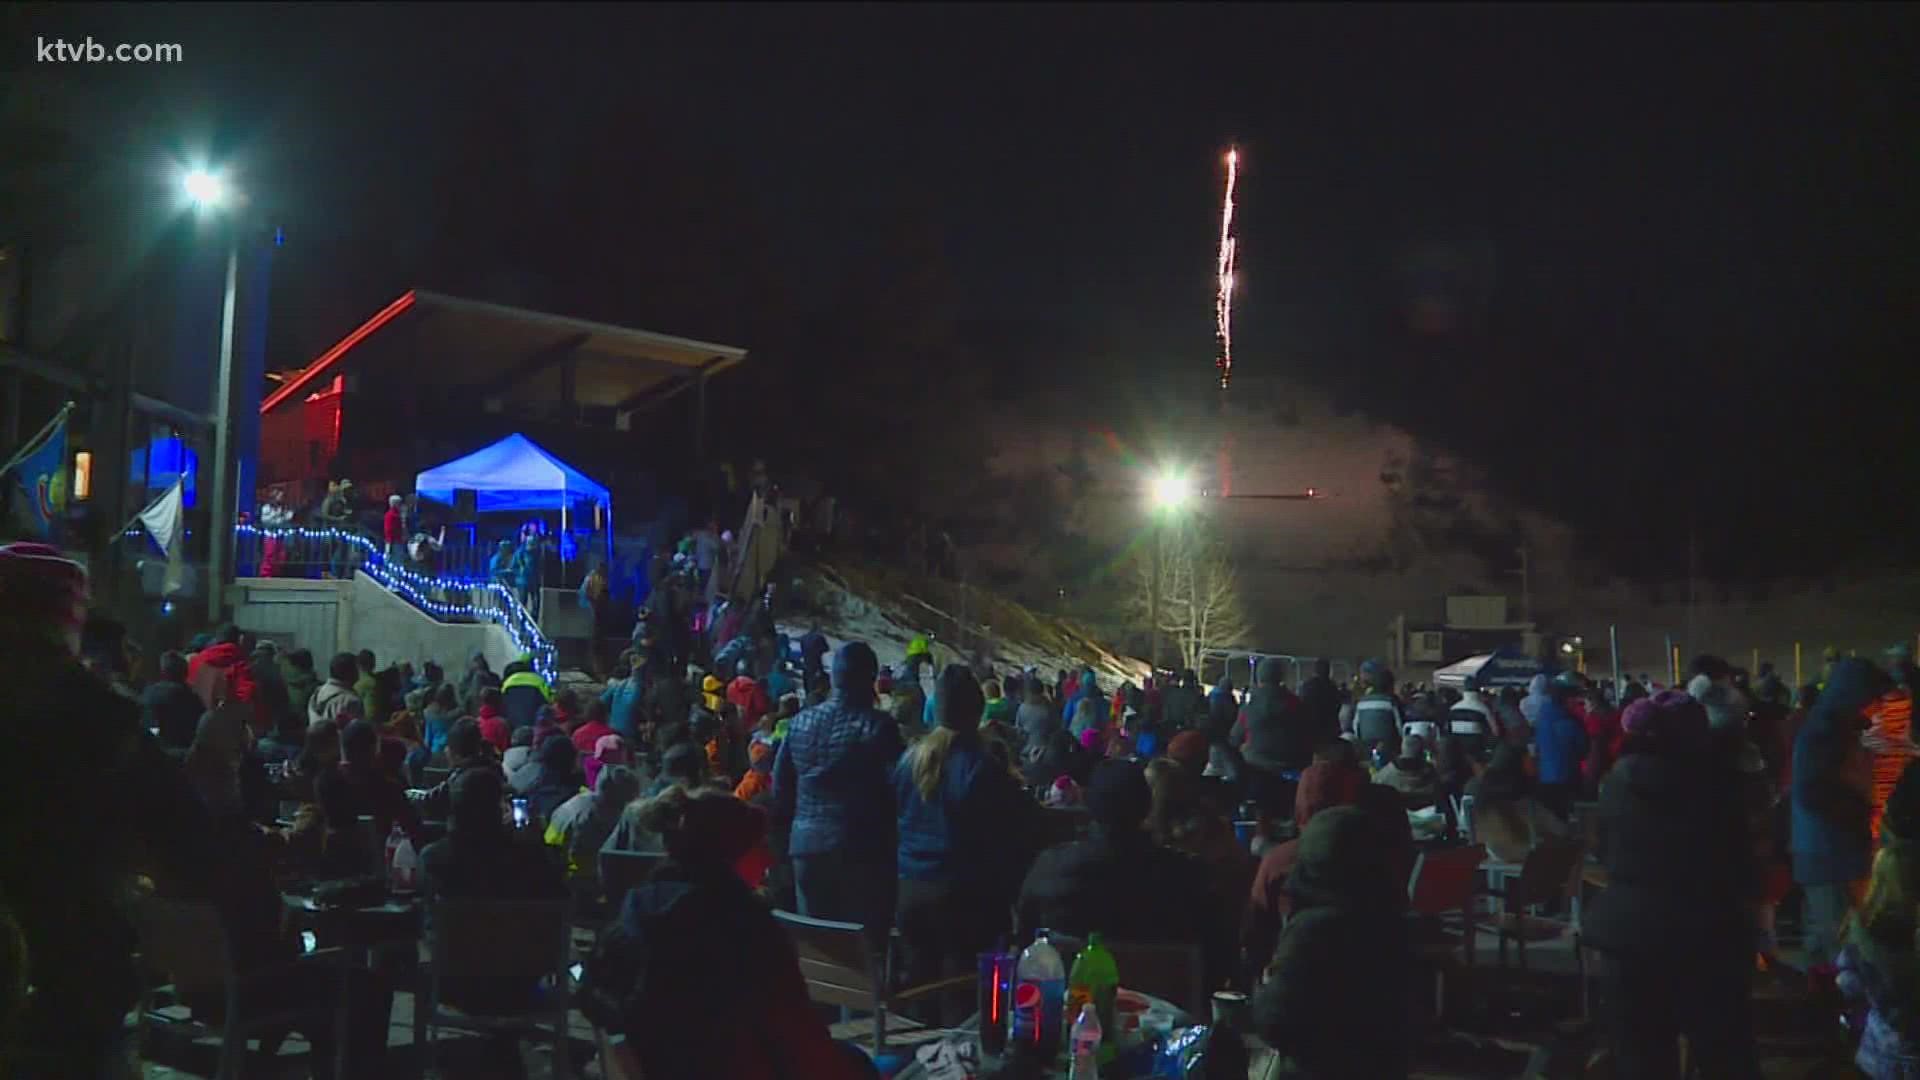 Organizers say the fireworks and parade typically draws a large crowd of non-skiers who may not be prepared to spend long periods of time out in the cold.